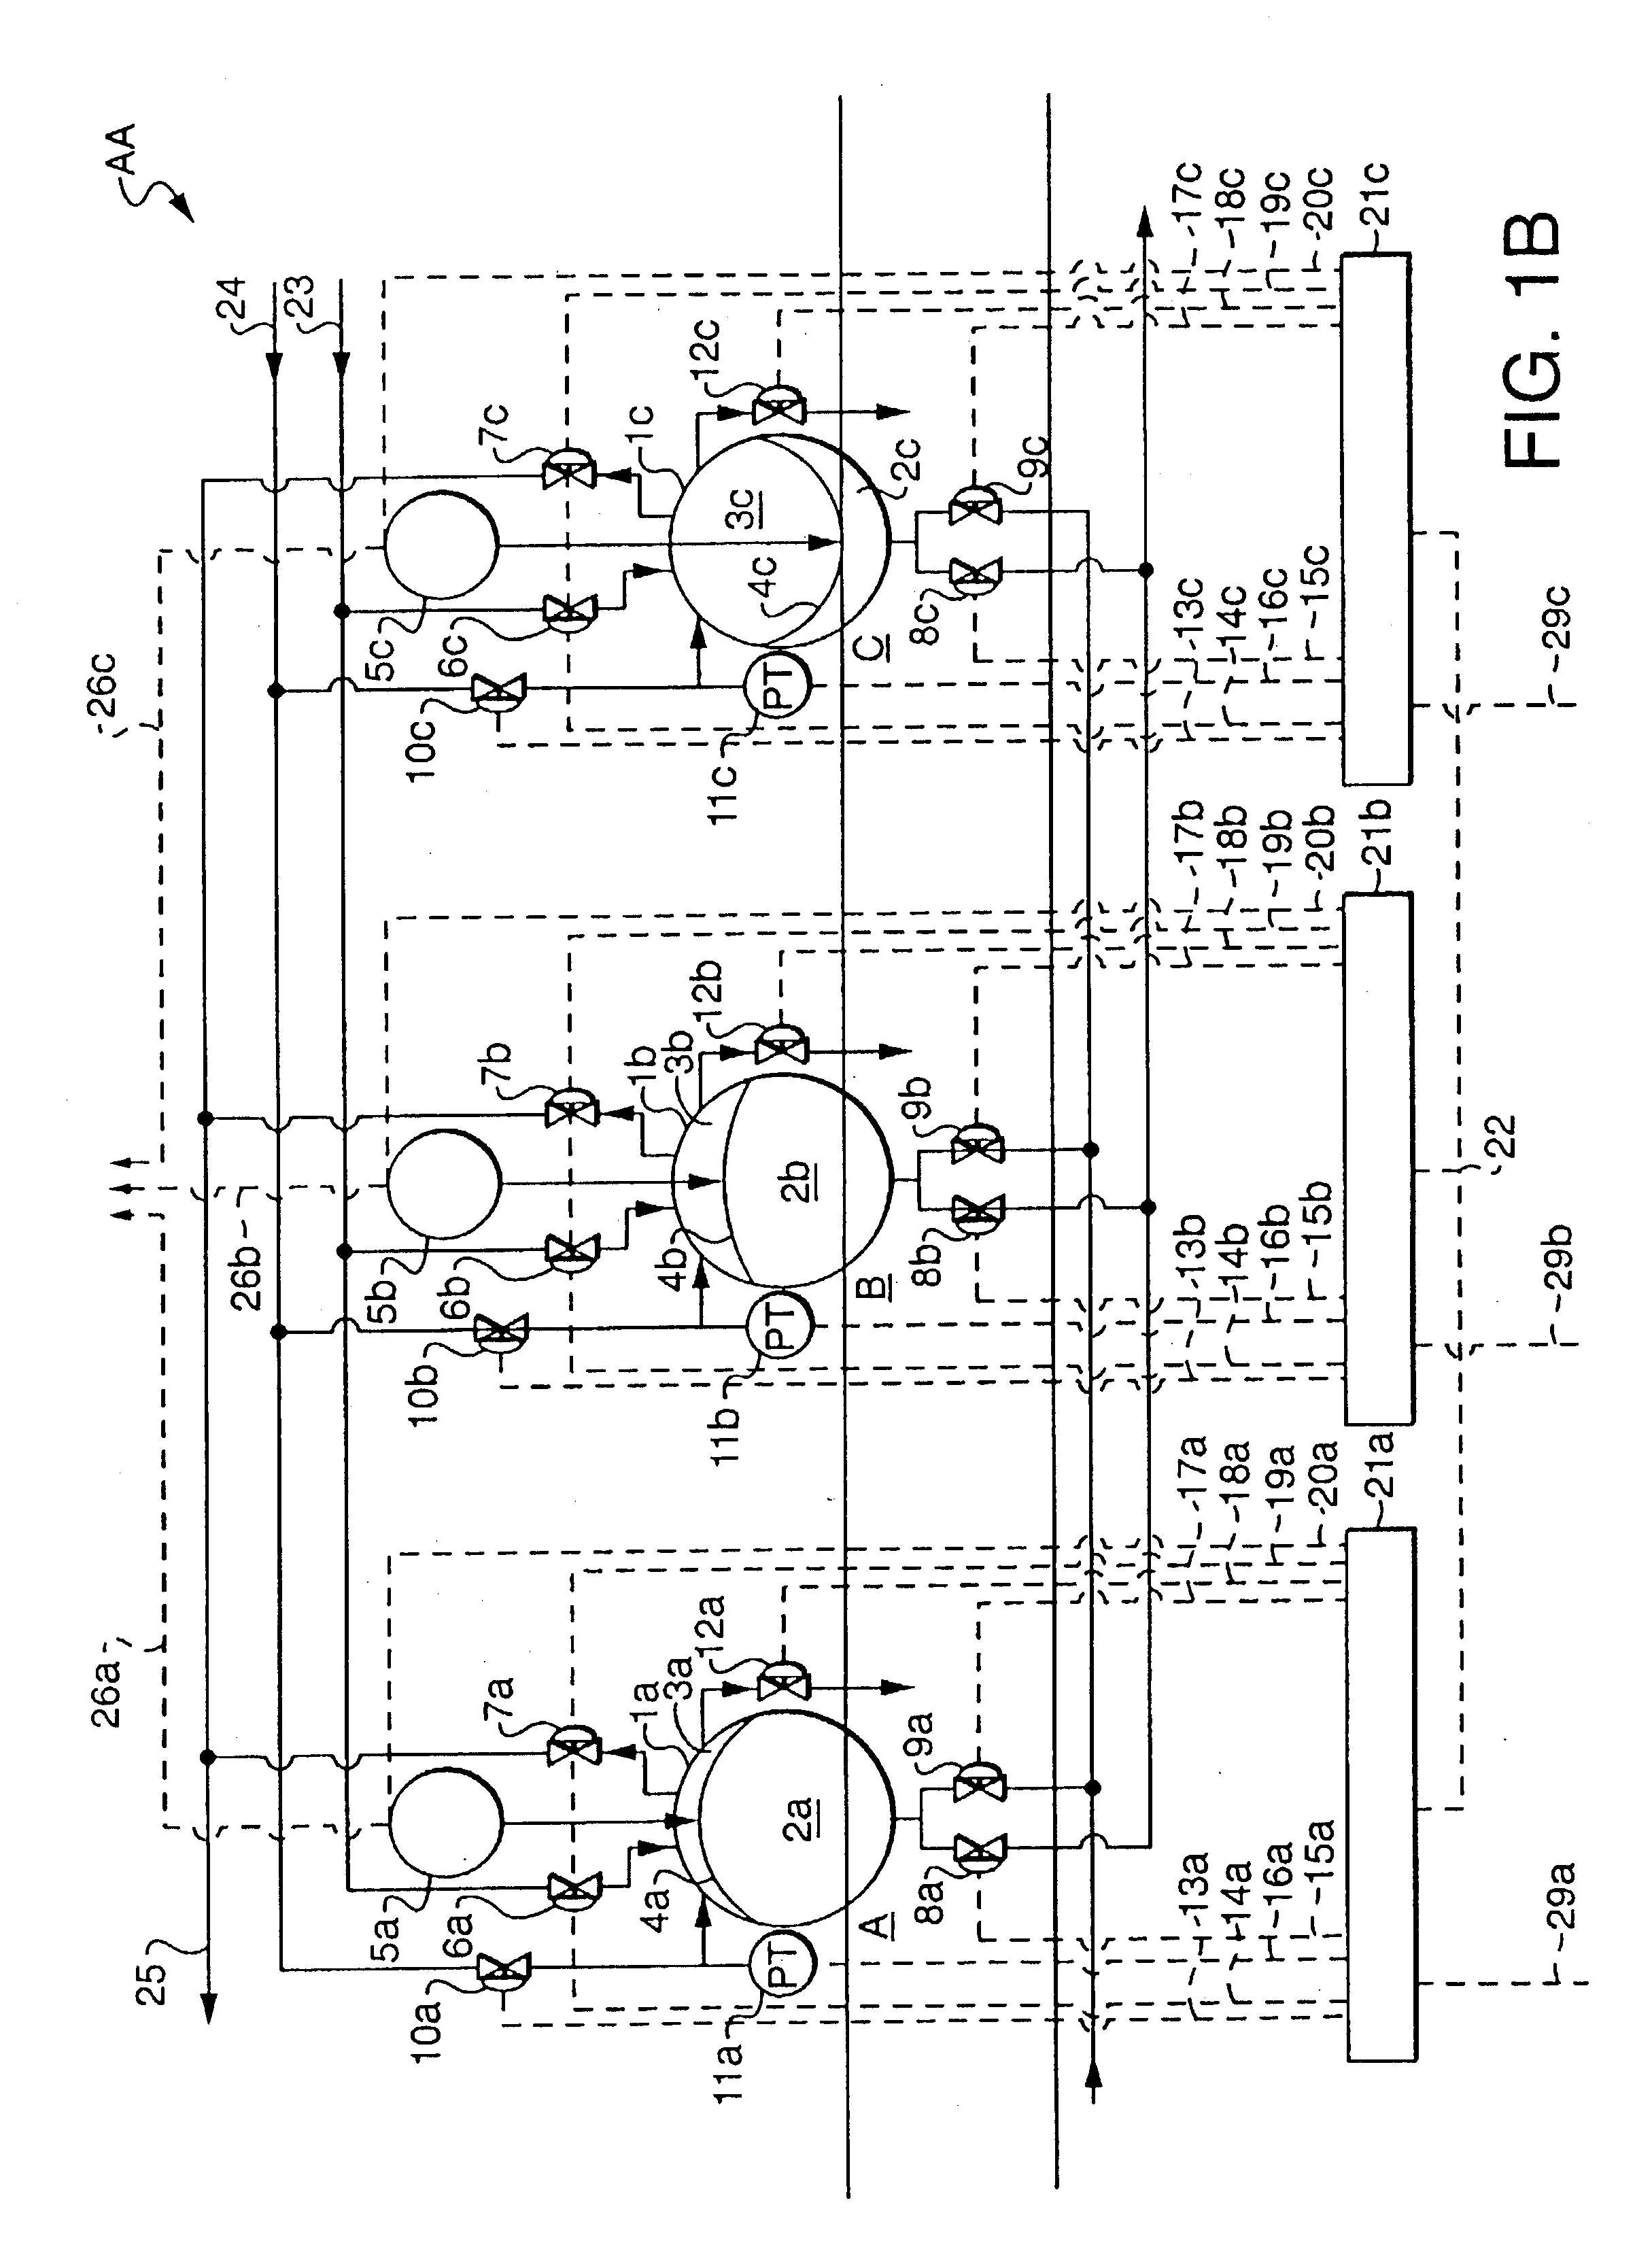 Subsea mud pump and control system